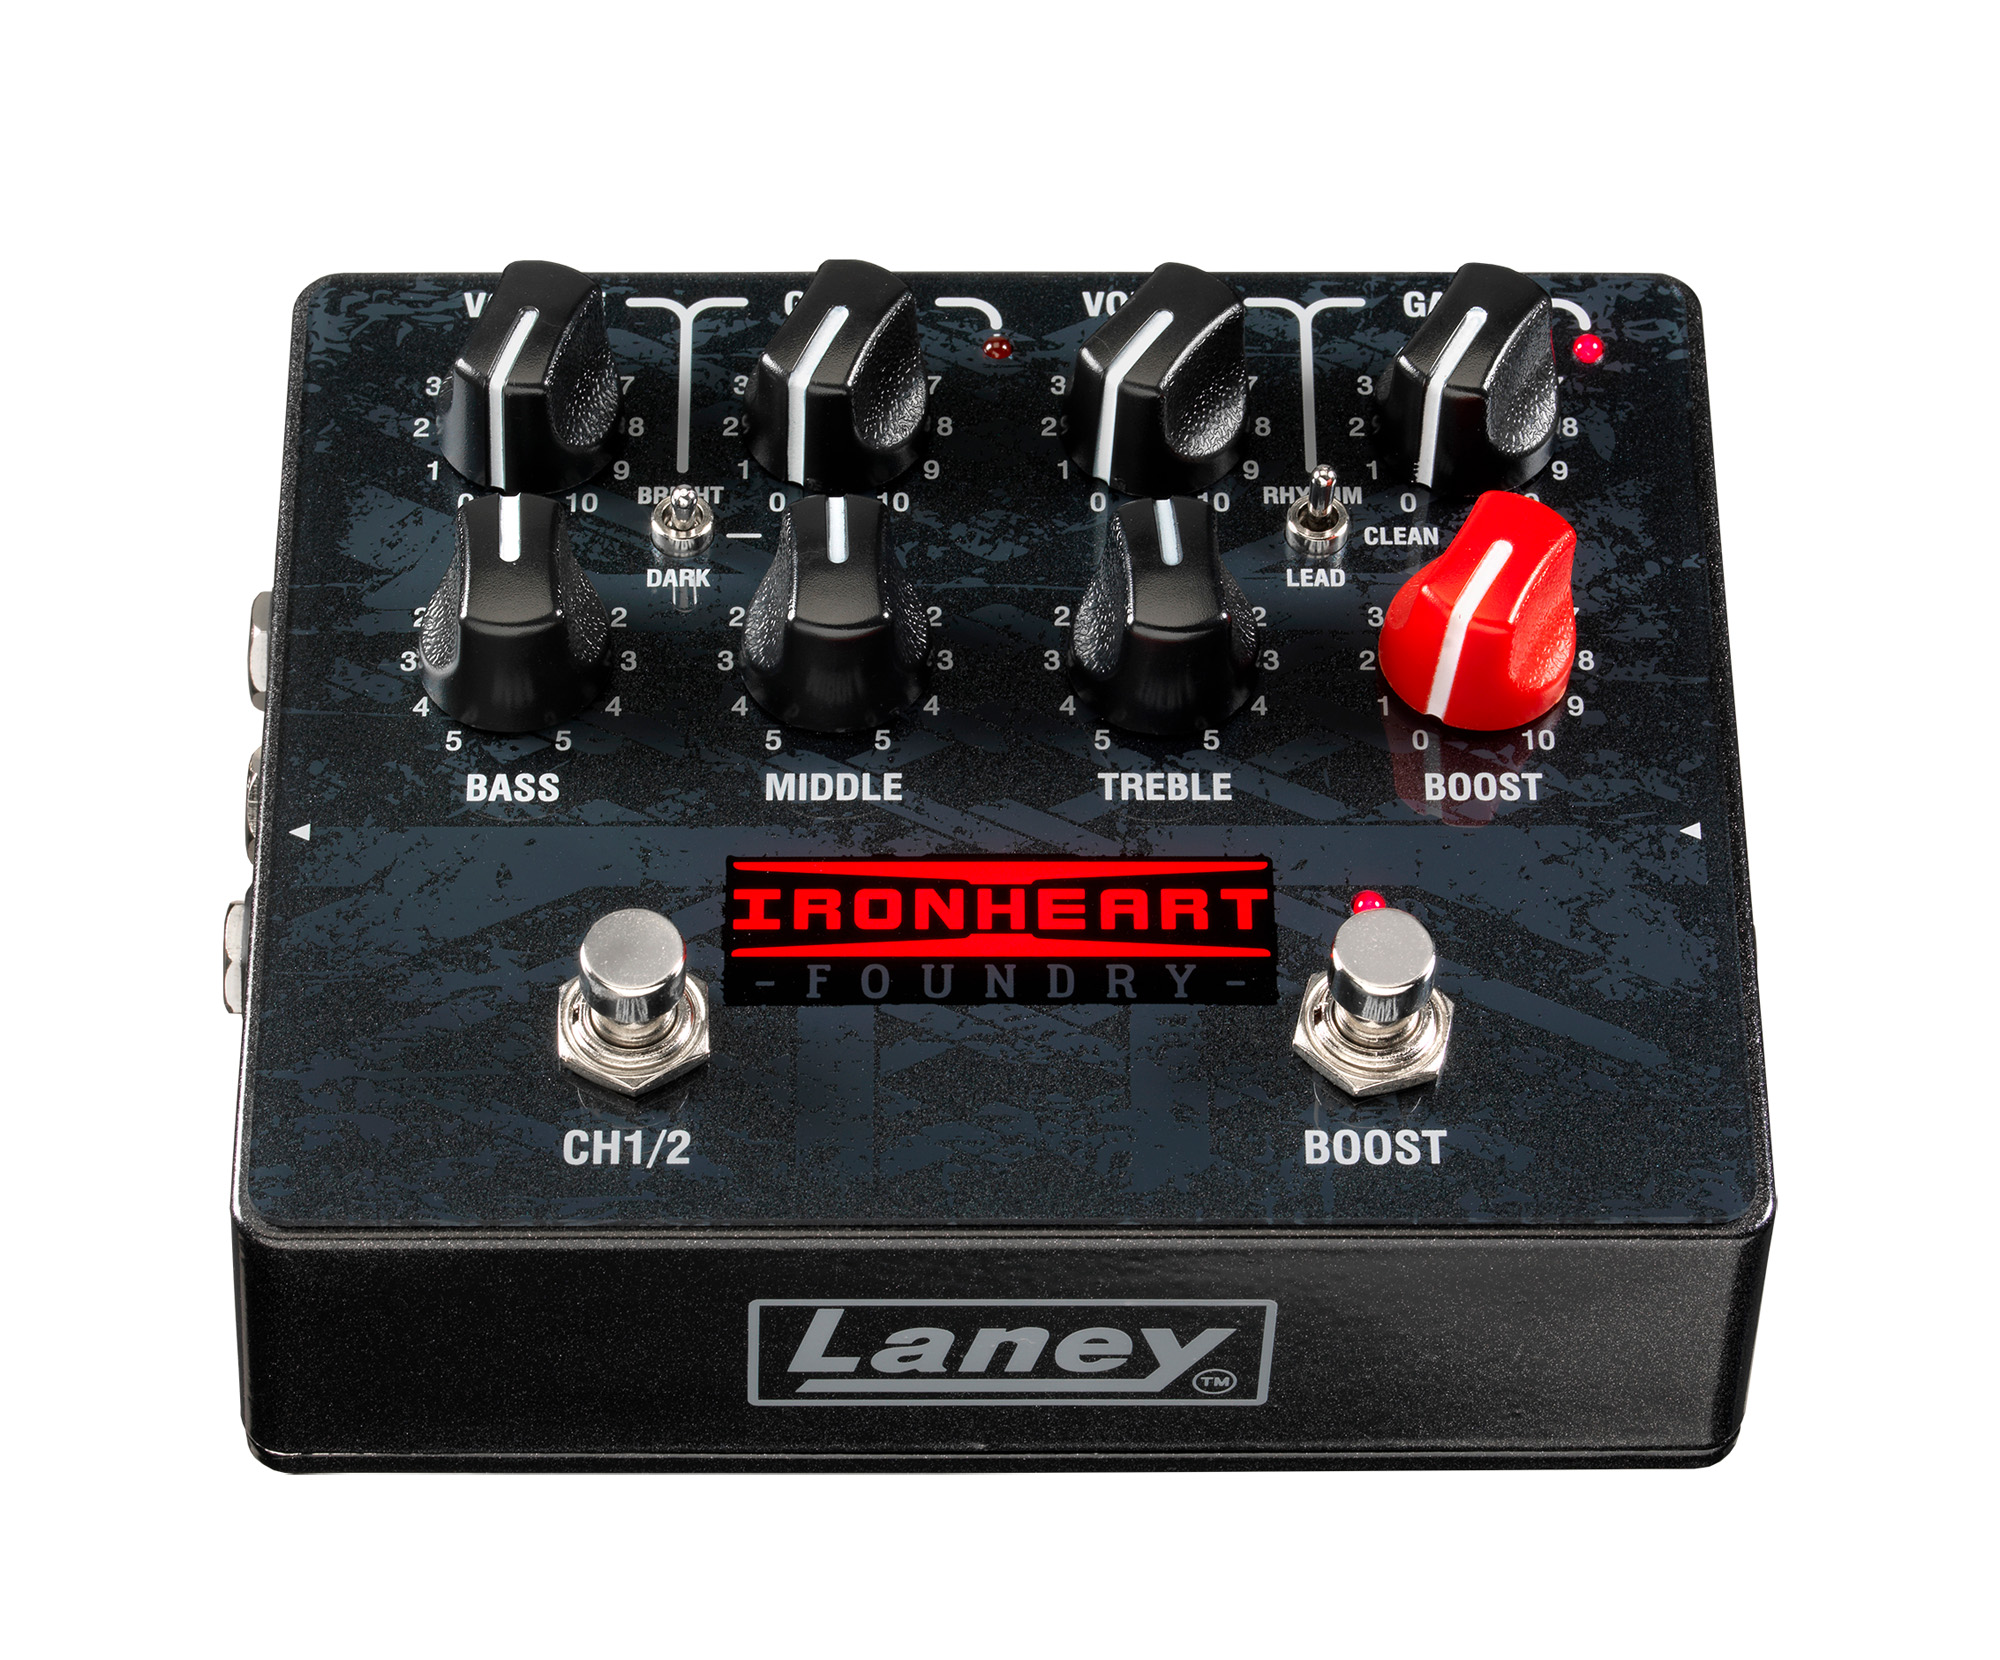 Laney Ironheart Loud Pedal - Electric guitar preamp - Variation 3